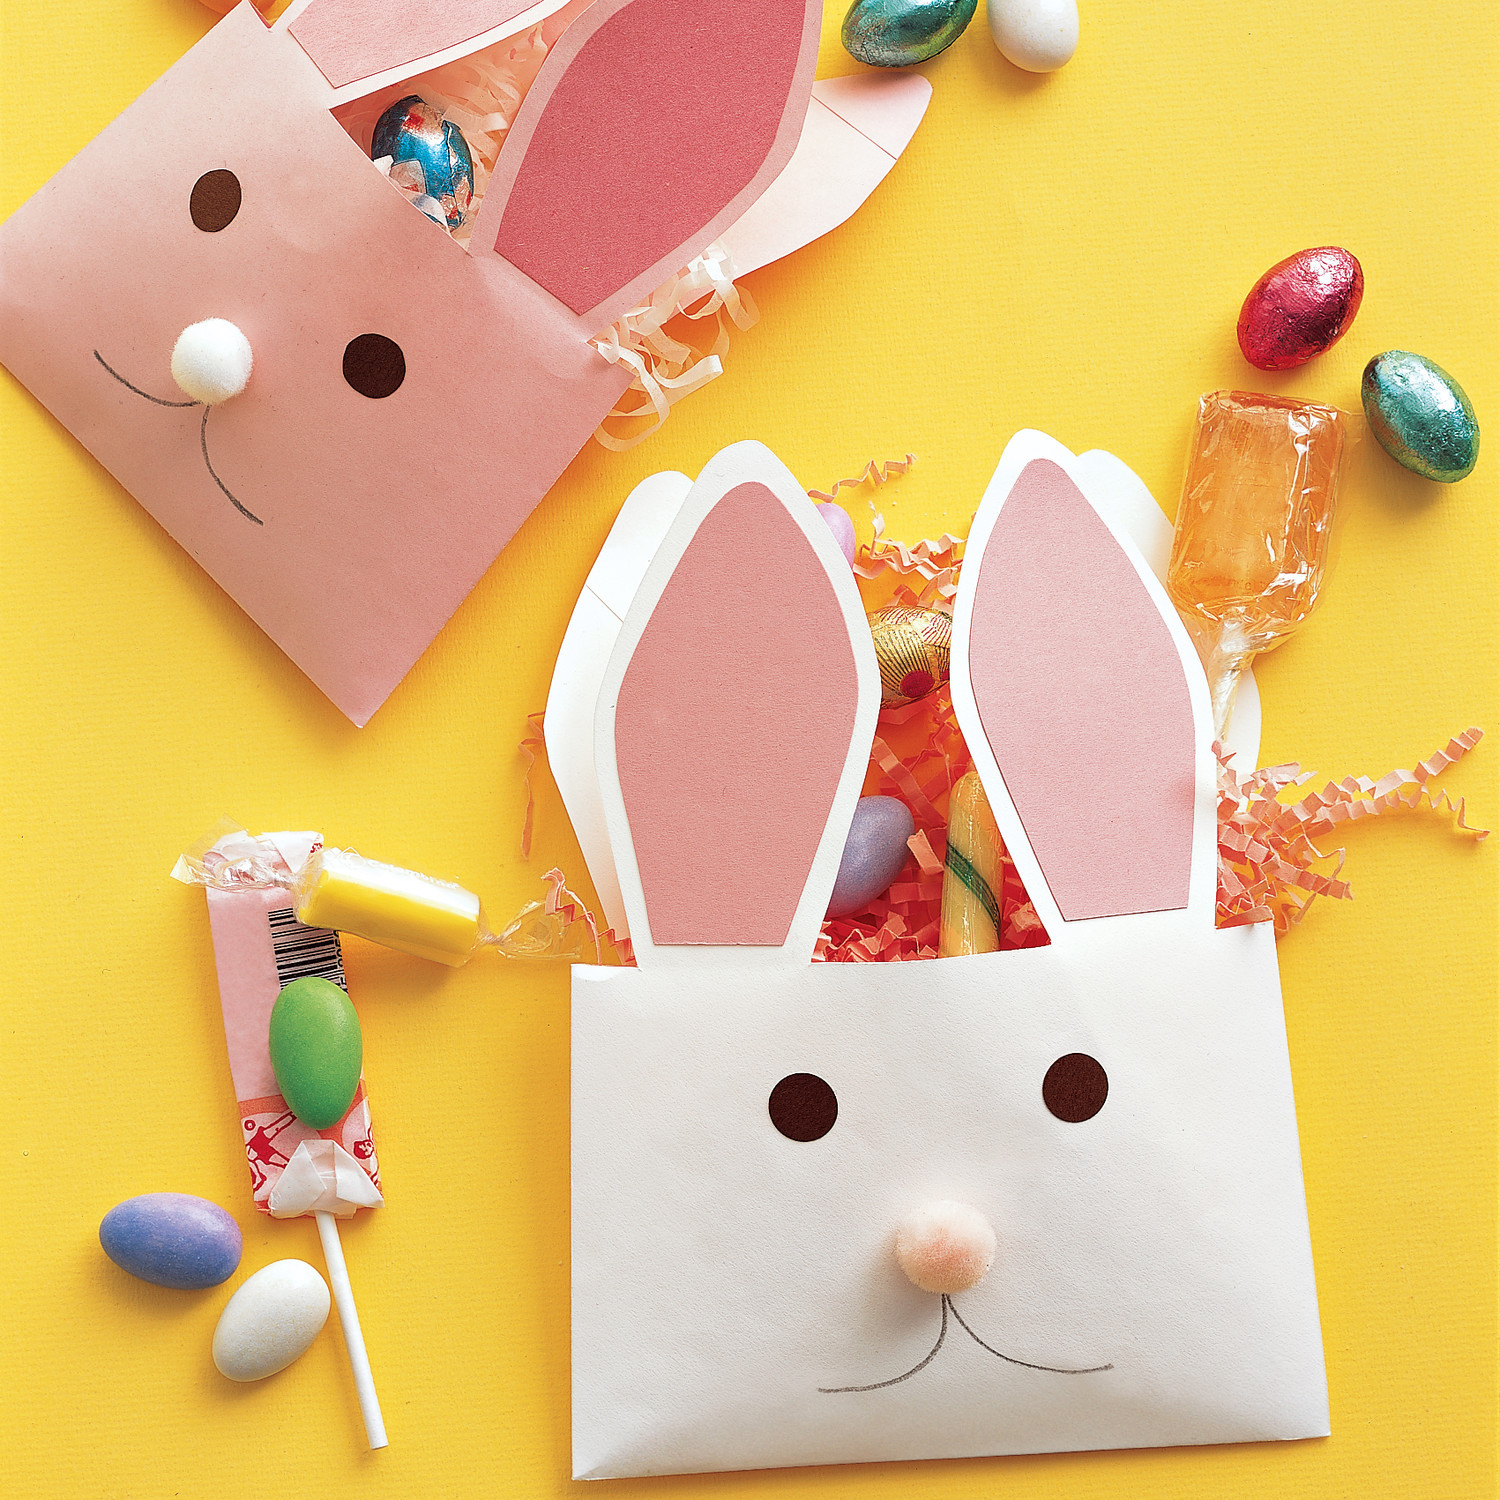 Art N Crafts For Toddlers
 The Best Easter Crafts and Activities for Kids